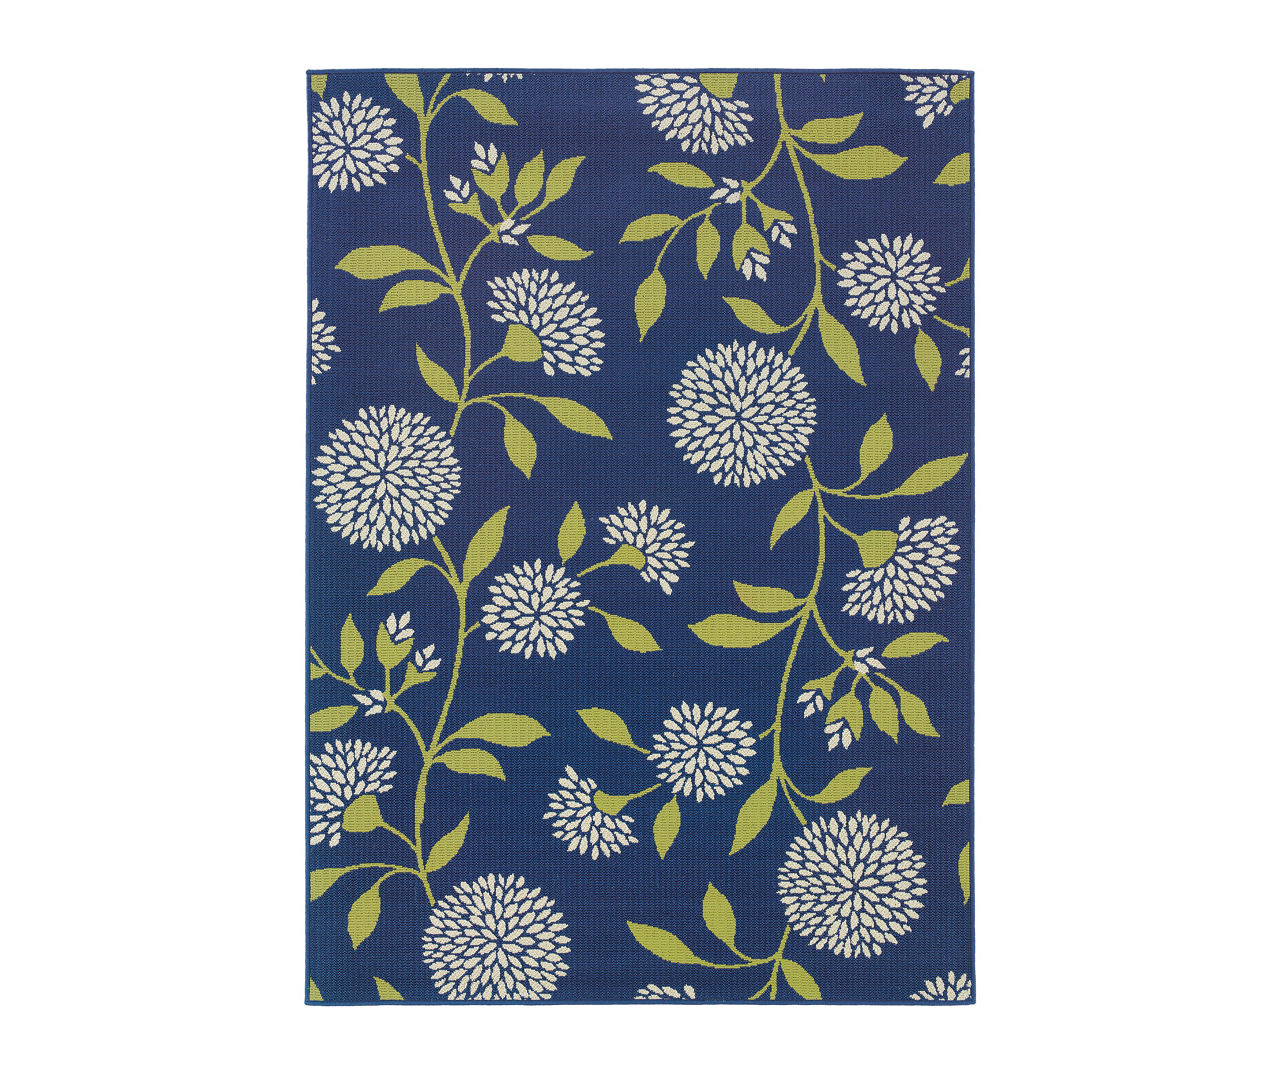 Heather Floral Outdoor Area Rug, (7'10" x 10')